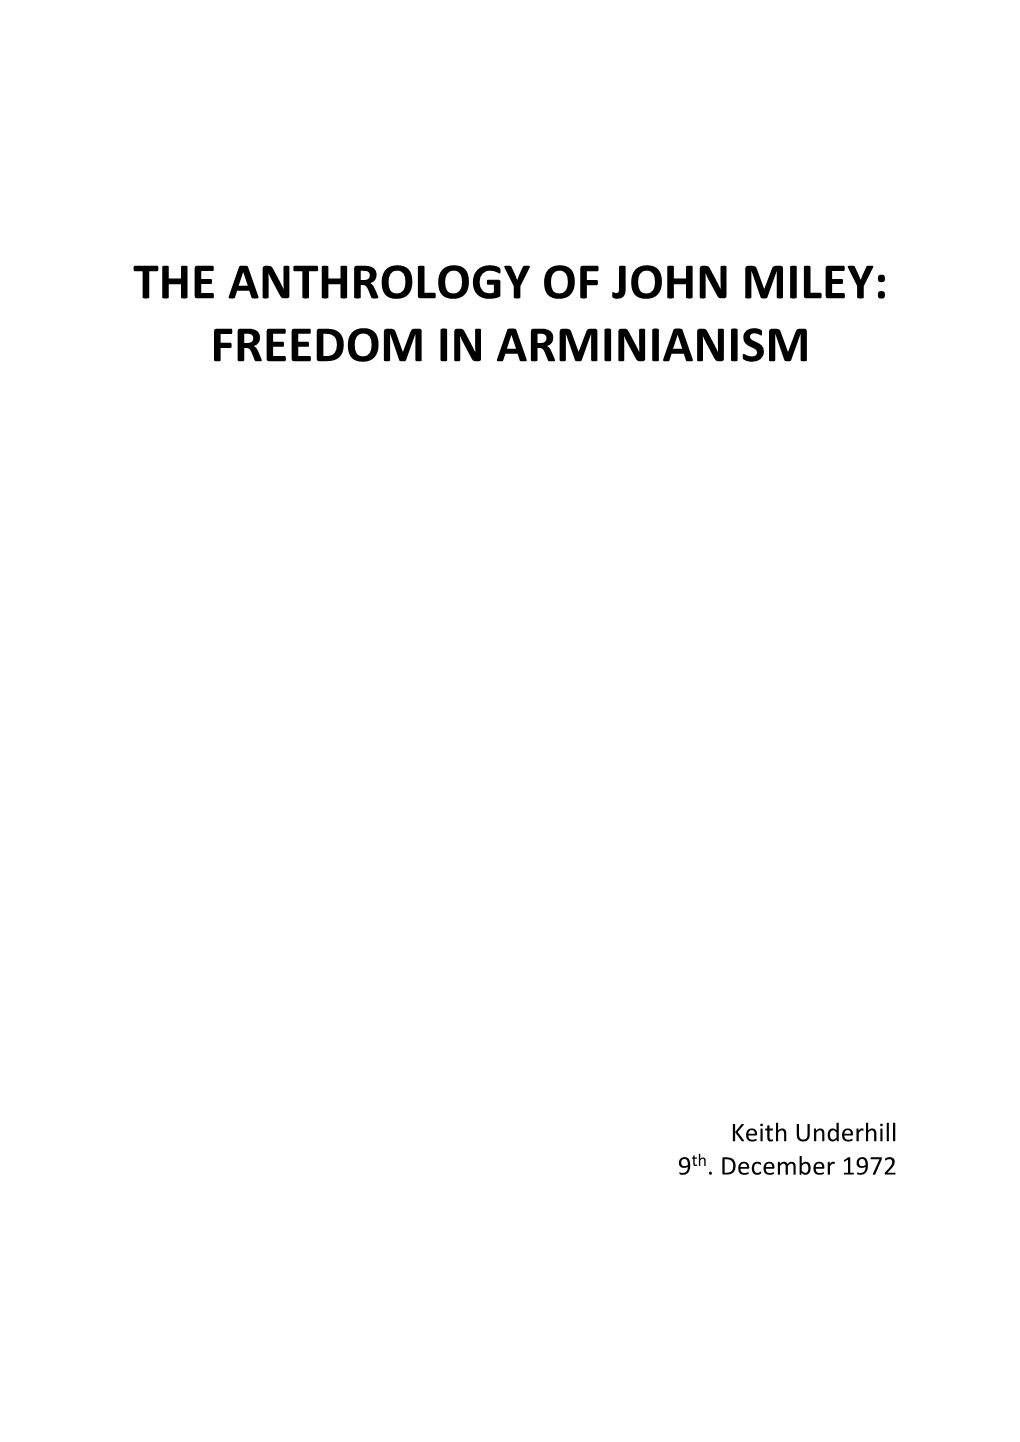 The Anthrology of John Miley: Freedom in Arminianism